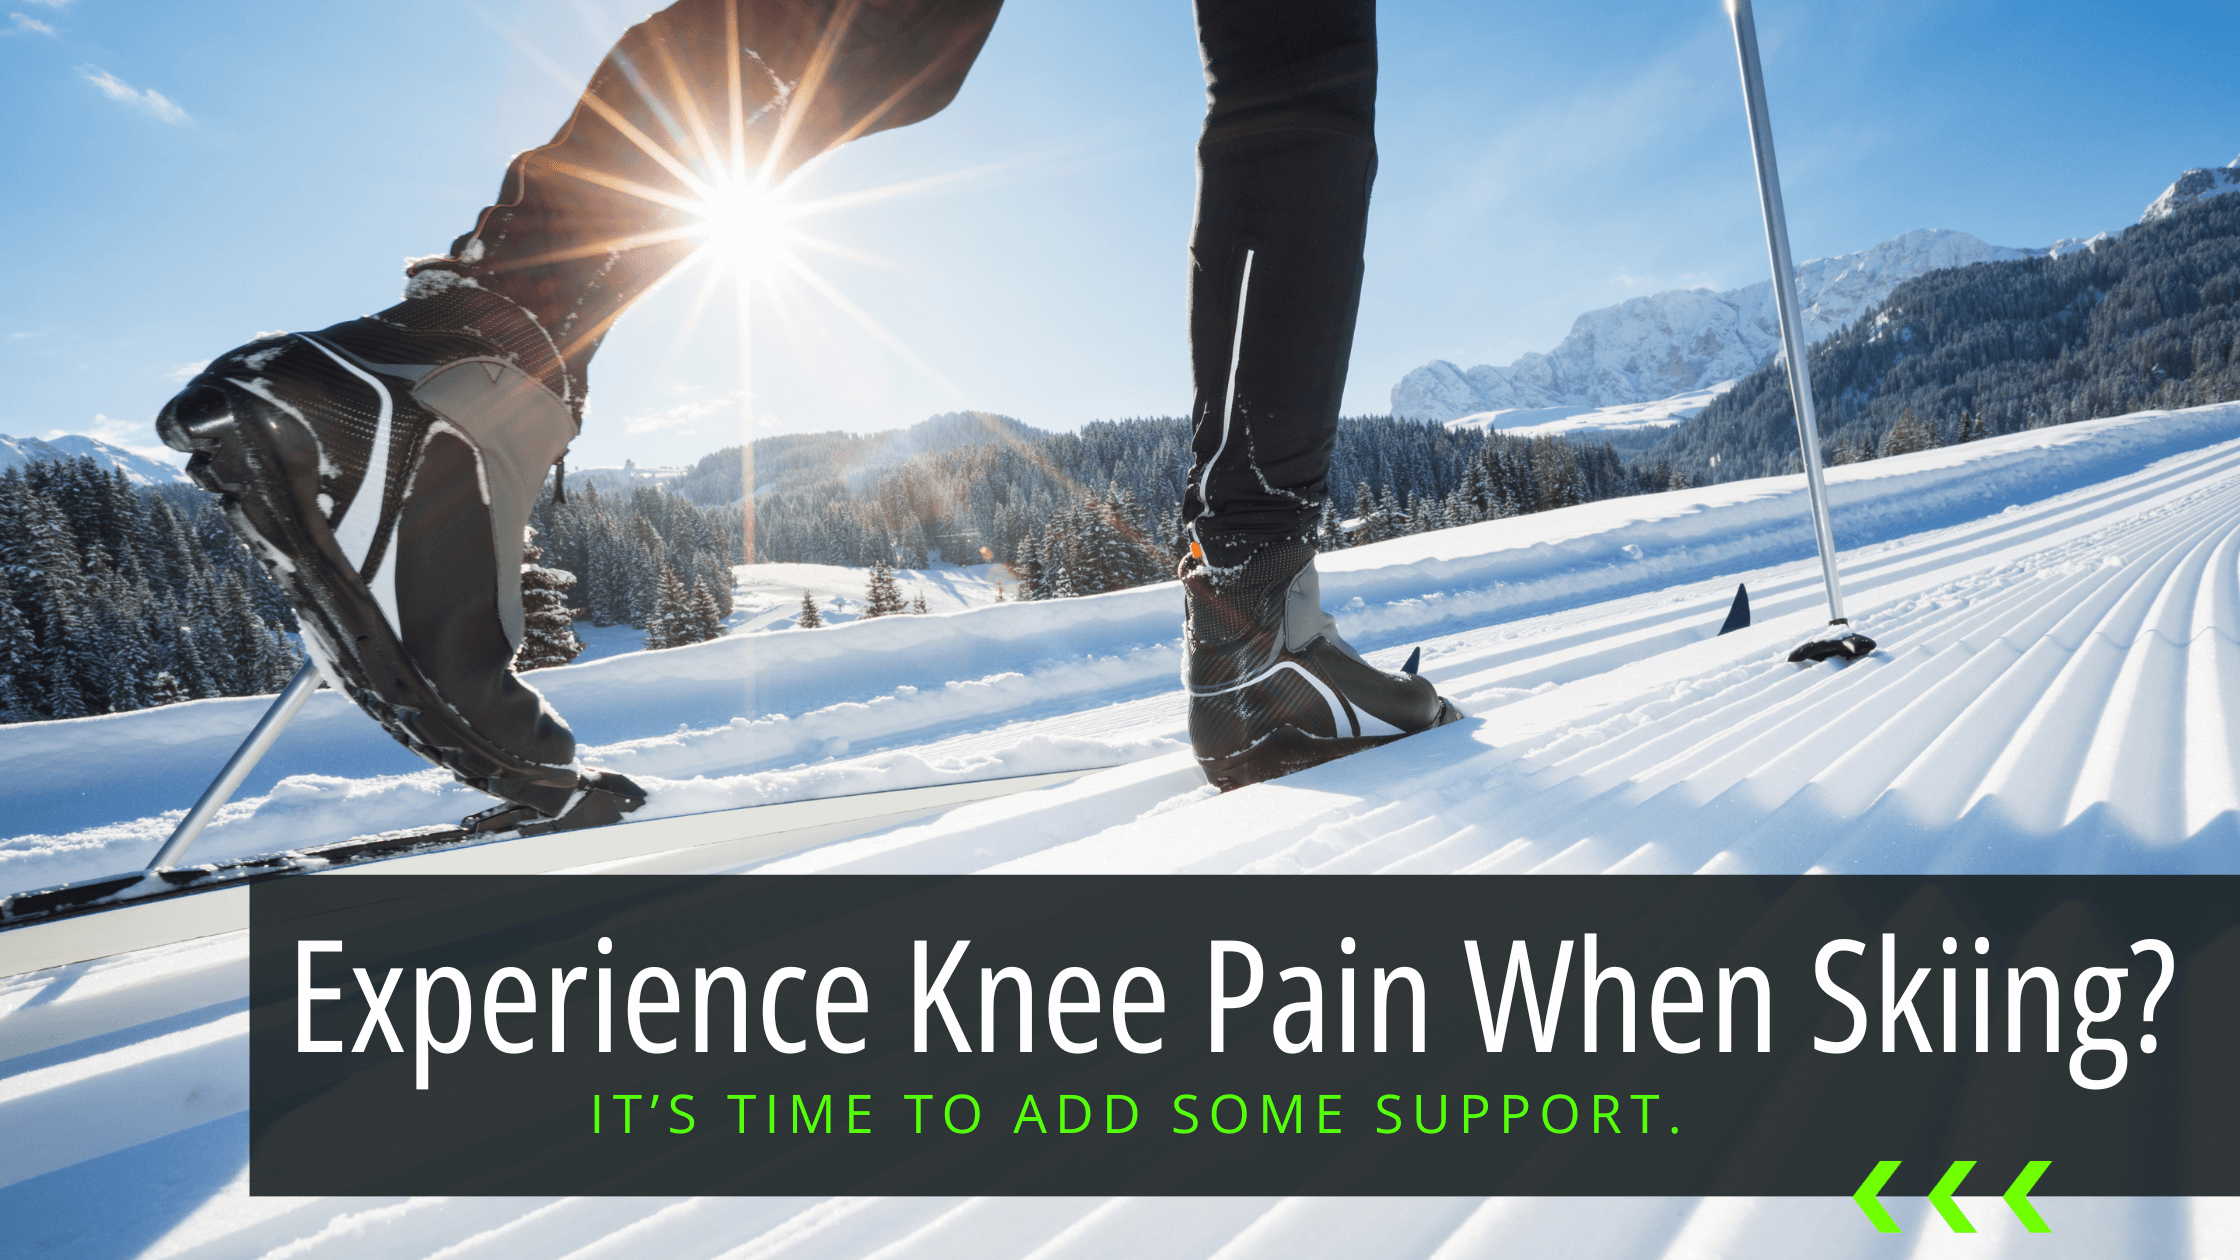 Bracelayer Blogs: Header image containing the feet and knees of a skier to introduce the "Experience knee pain when skiing?" blog. 